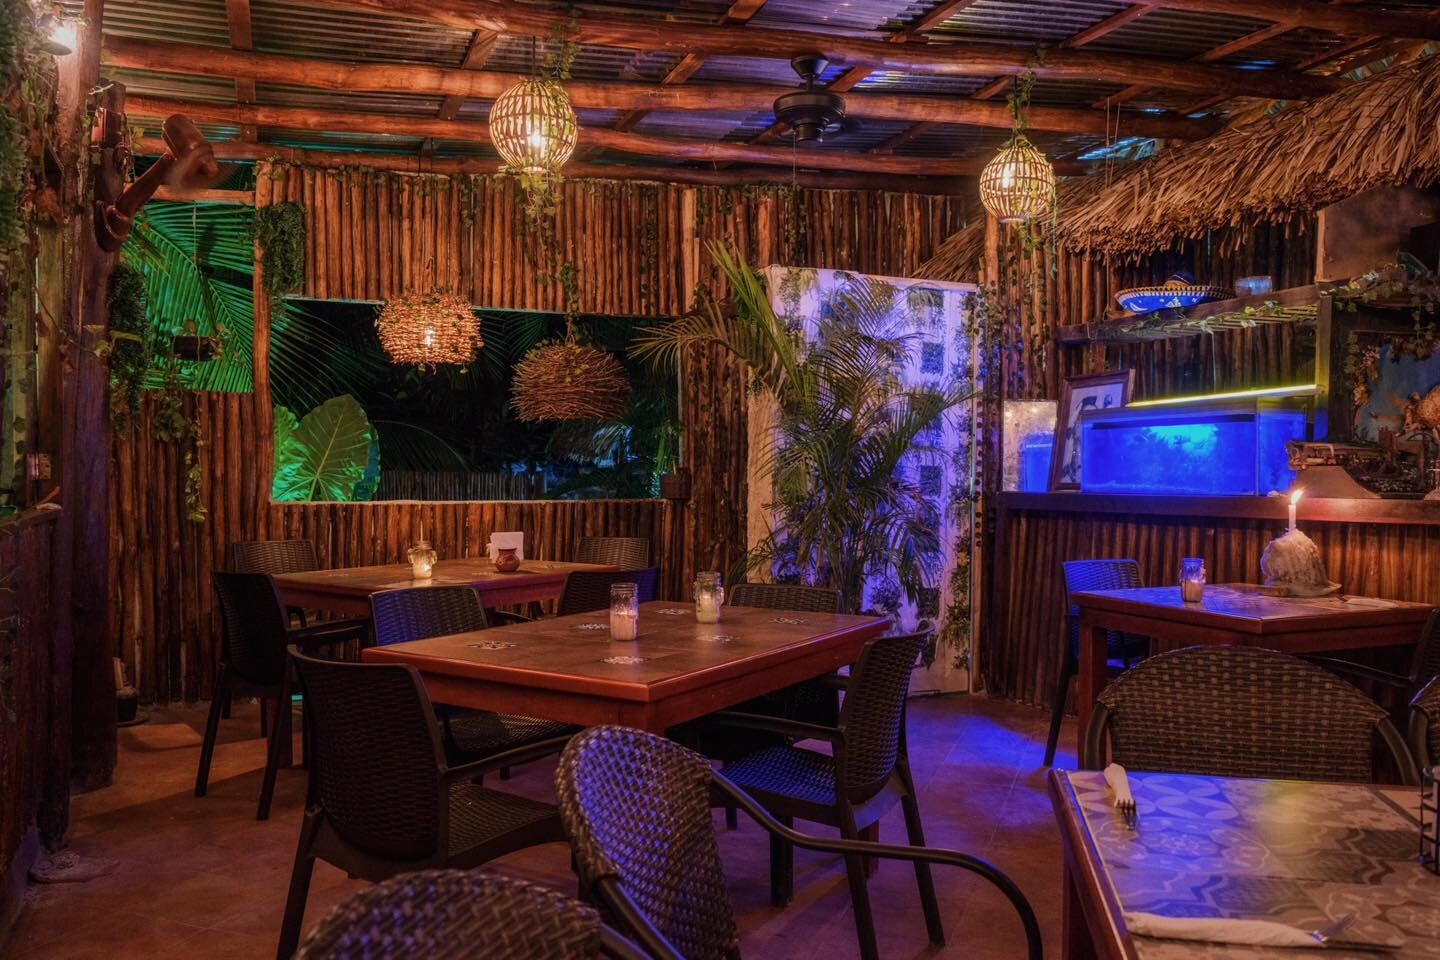 Our back patio 🤍 what do you think? 

#islacozumel #cozumelmexico #mexicancaribbean #lobsterlover #cozumel #bestrestaurants #lobstertails #cozumelisland #supportlocal